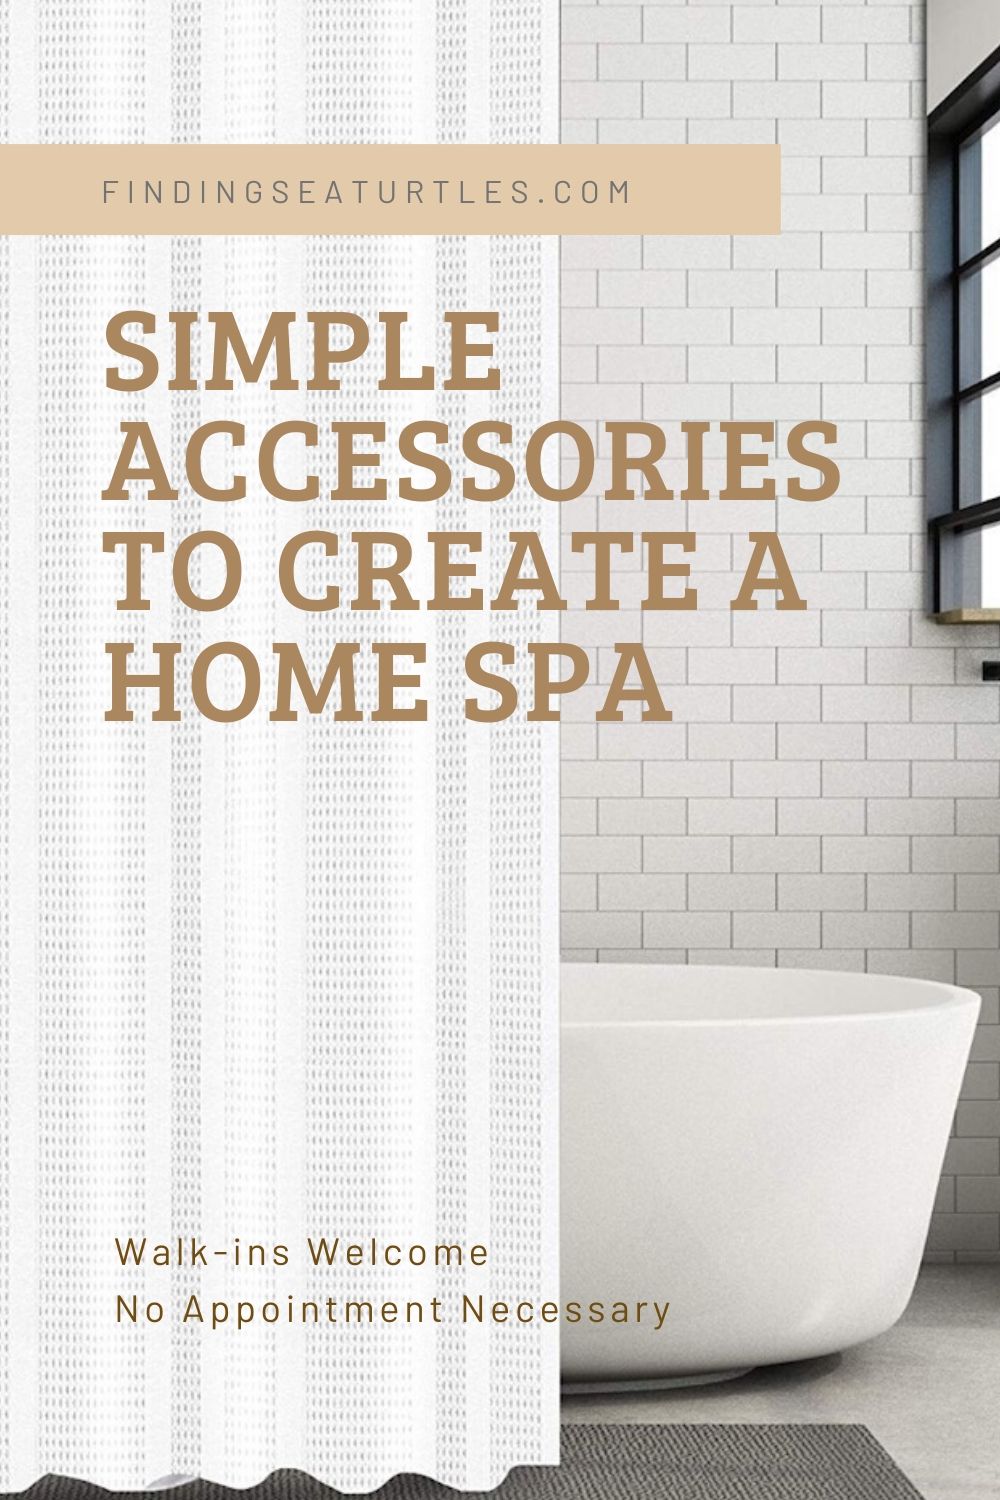 Simple Accessories to Create a Home Spa Walk ins Welcome #Spa #bathroom #HomeSpa #PamperYourself #SpaAccessories #MeTime #BathSpa #DIYHomeSpa #Relax #Soothing